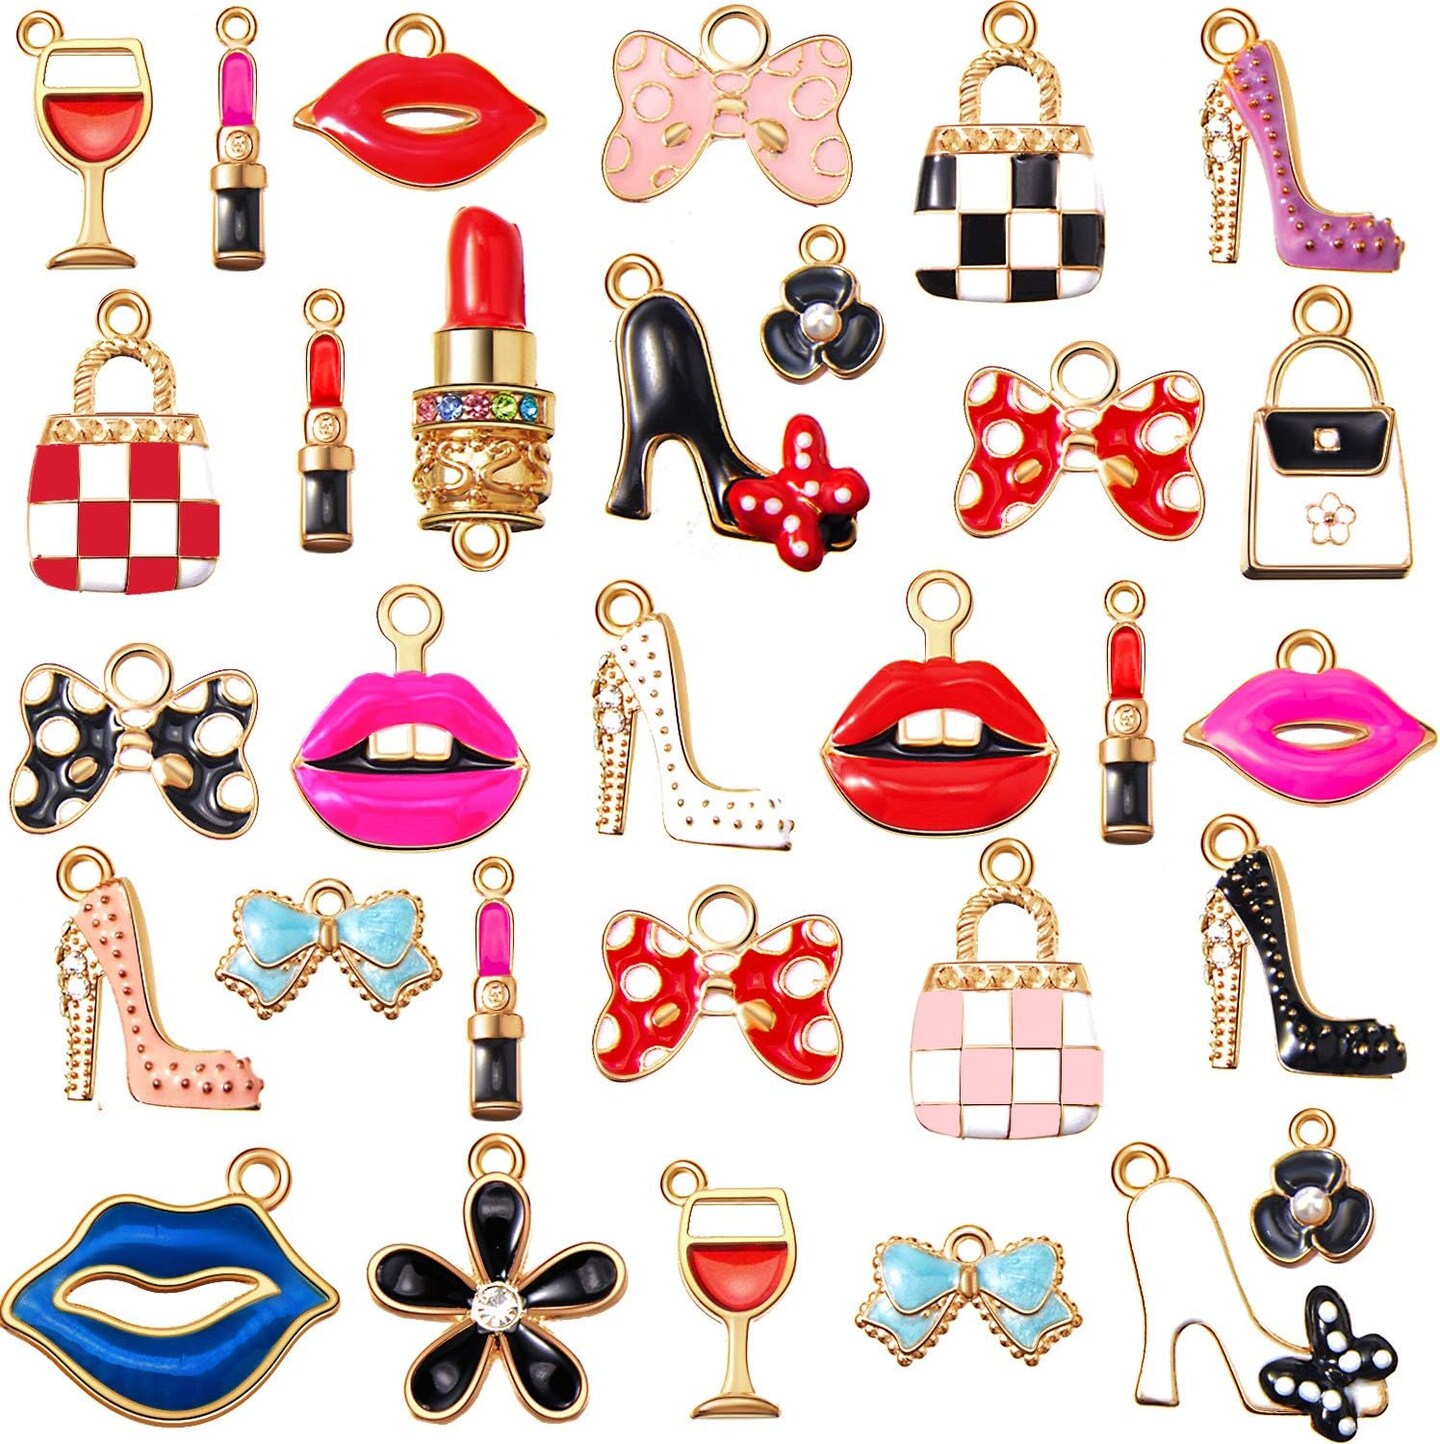 50 Pieces Enamel Charms for Bracelet Jewelry Making Women Makeup Earrings Lipstick Craft Pendant High Heel Designer Charms Mixed Gold Plated Wallet Flower Bow Charms for DIY Necklace